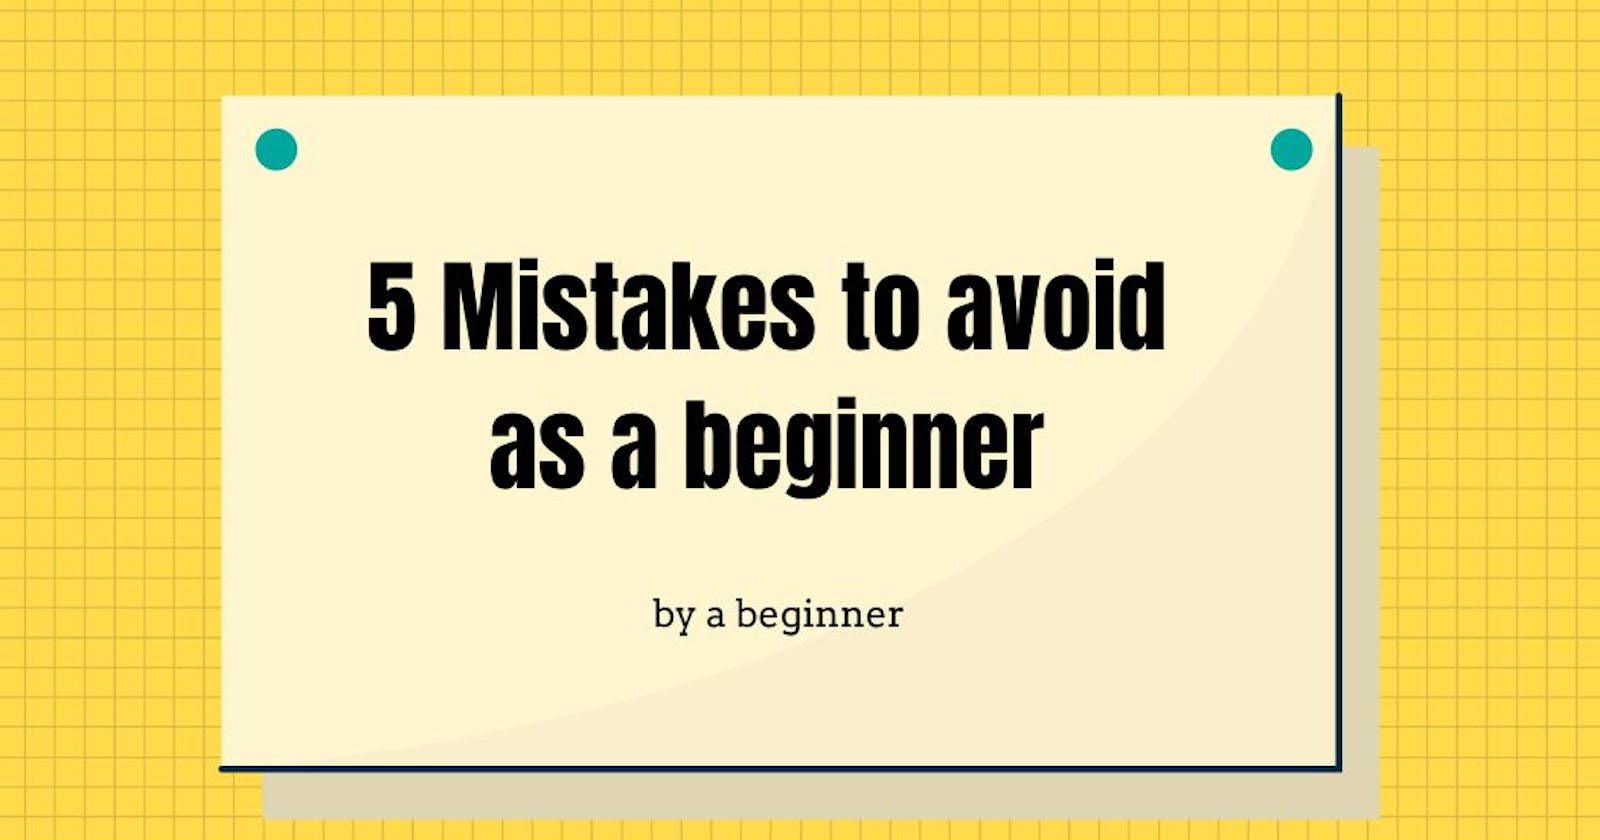 5 Mistakes to avoid as a beginner to accelerate your learning